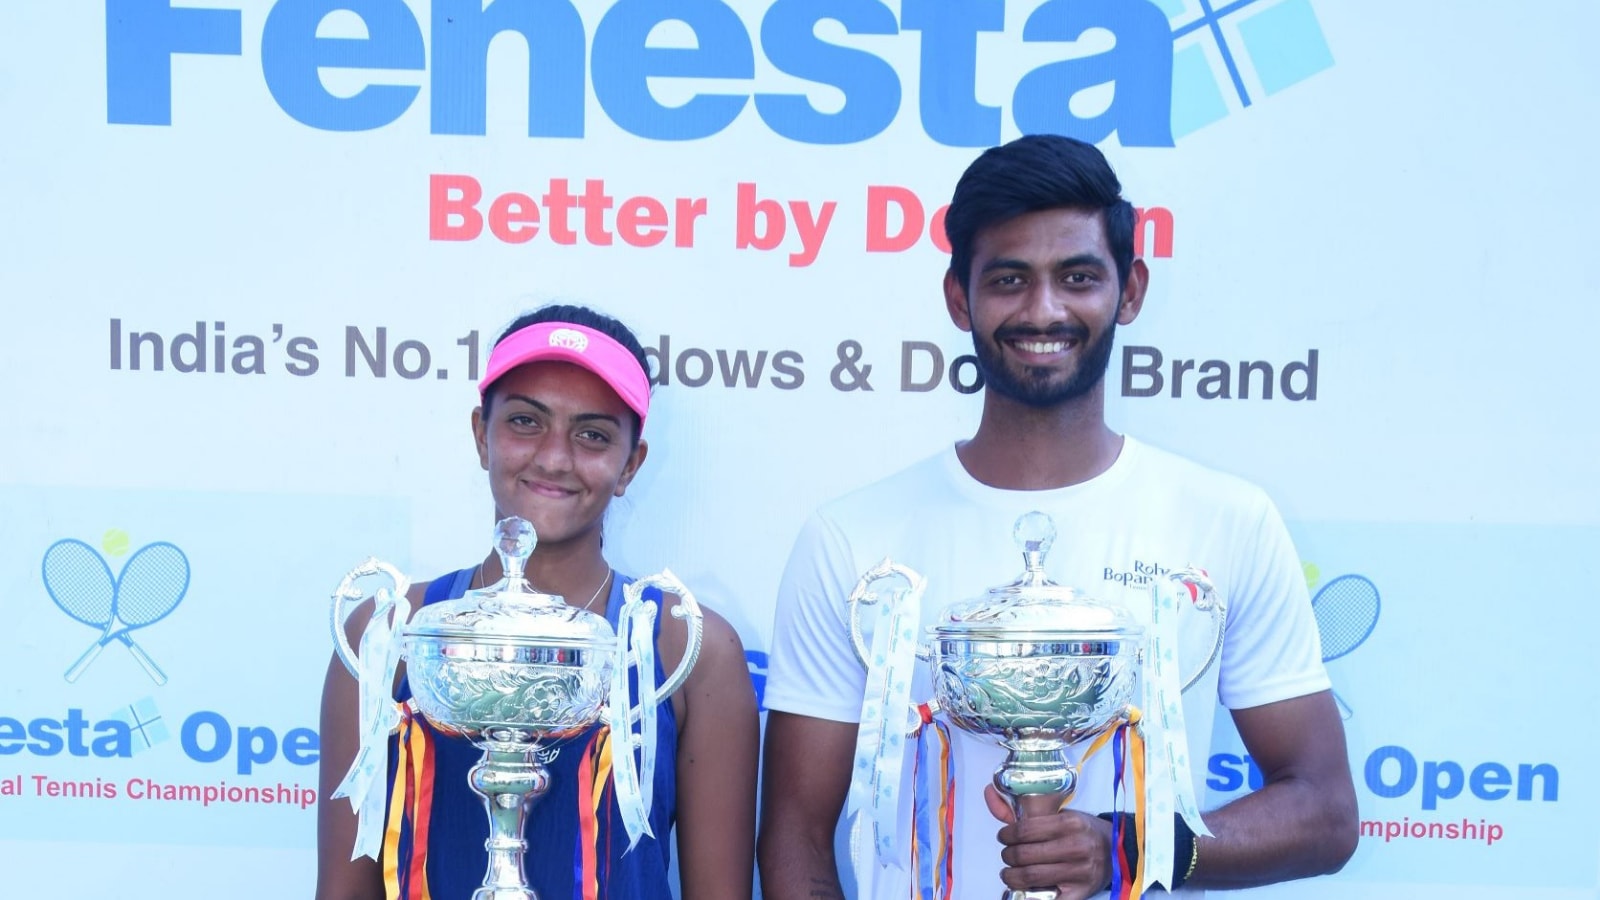 Fenesta Open National Tennis Championship 2018 – The Top Gainers